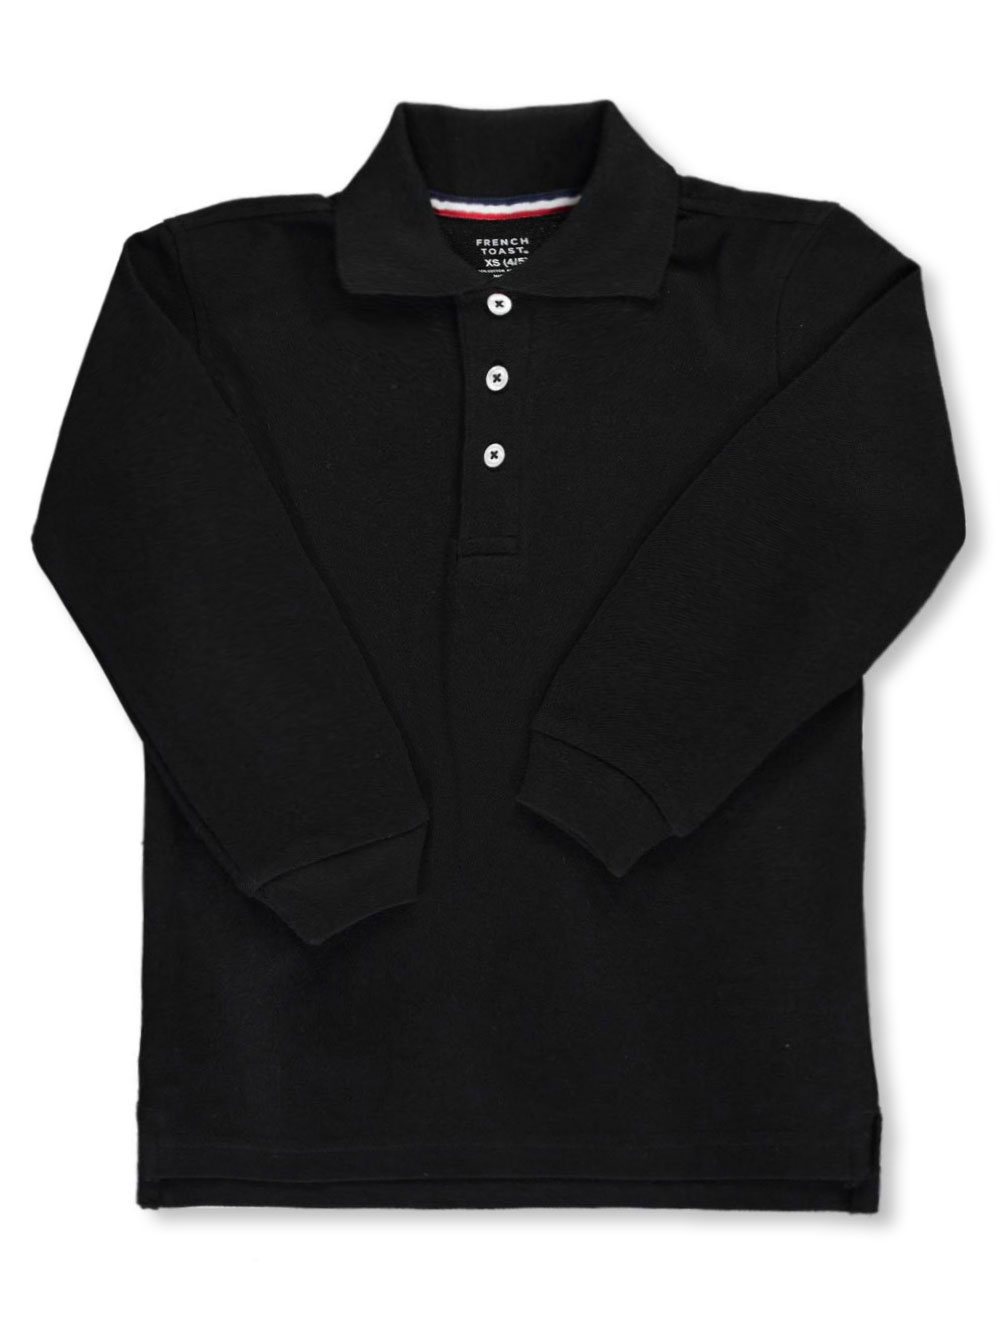 Size 2t Polos for Boys